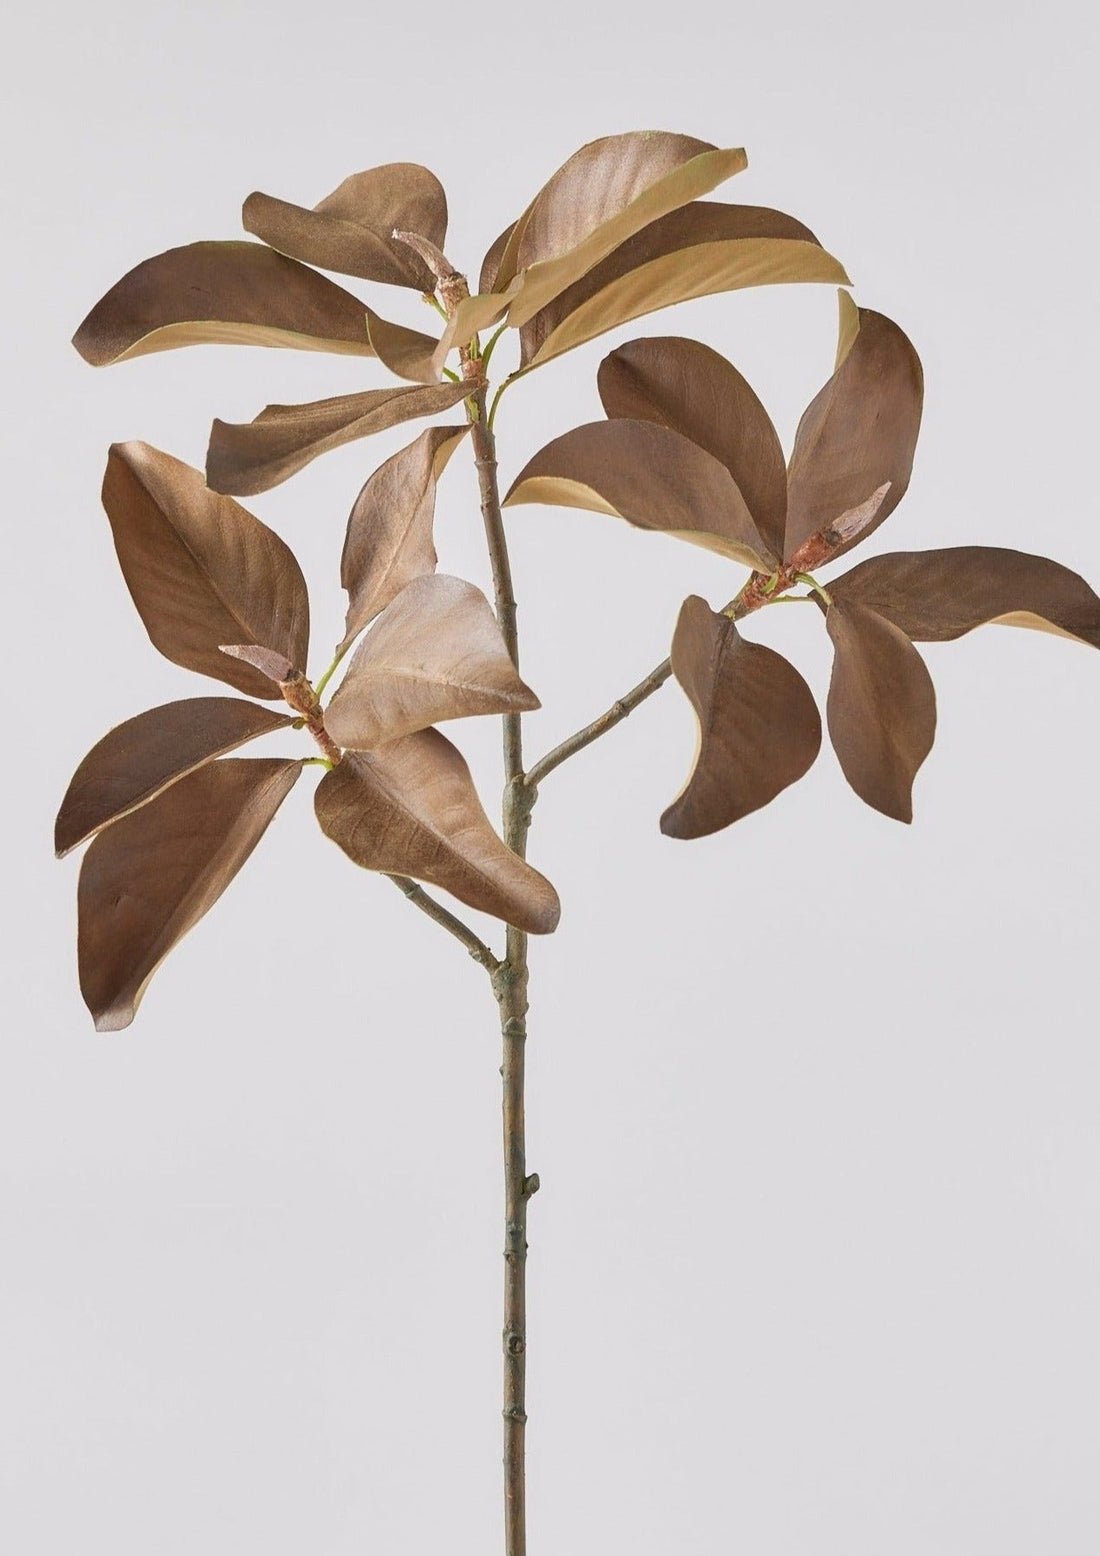 Afloral Faux Fall Stems in Brown Magnolia Leaf Branch